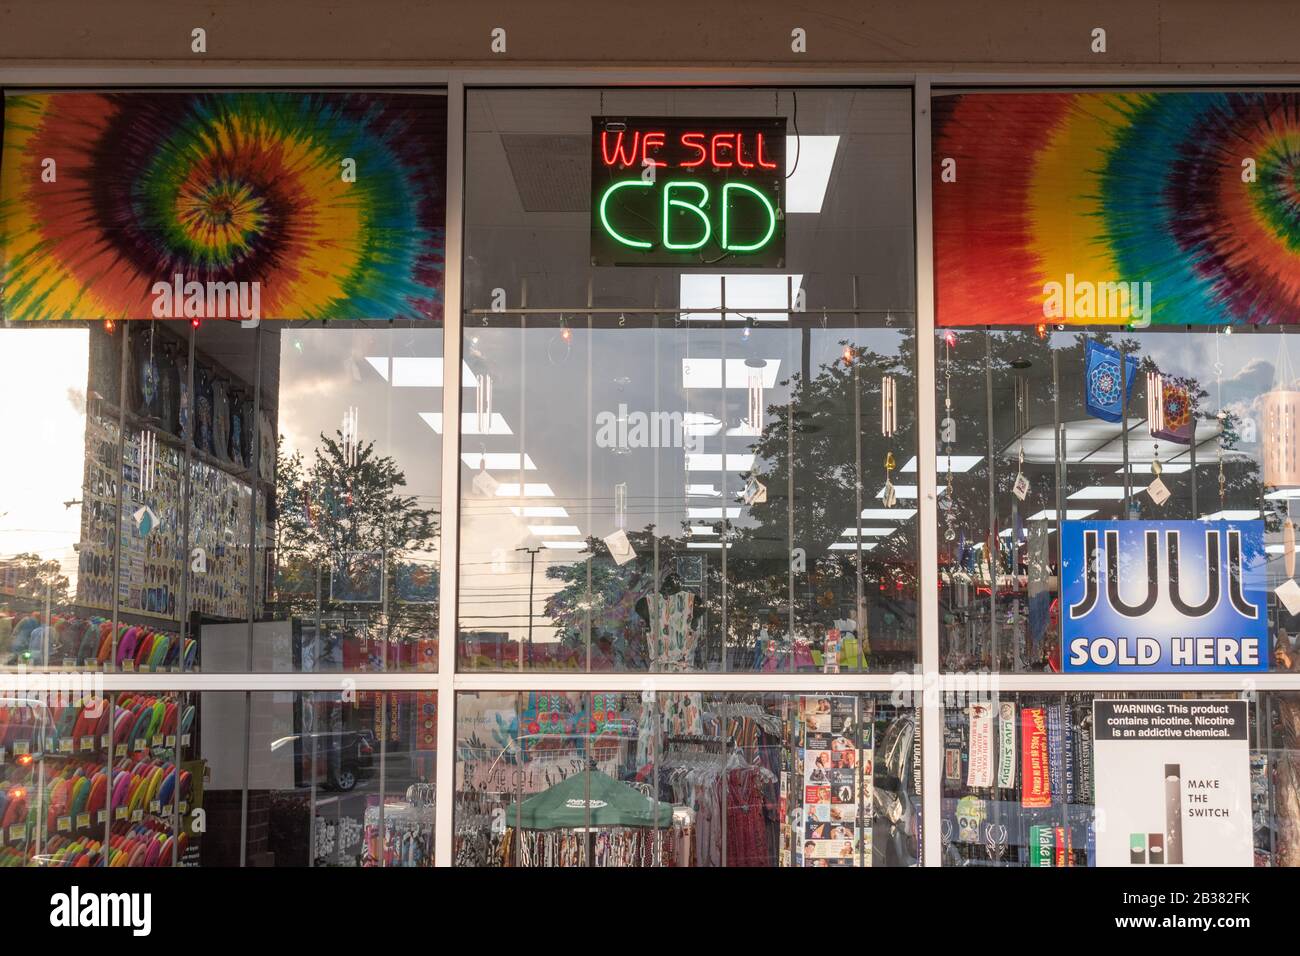 Charlotte, NC/USA - May 10, 2019: Medium closeup of colorful reflective storefront window with ads for CBD oil and JUUL e-cigarettes. Stock Photo